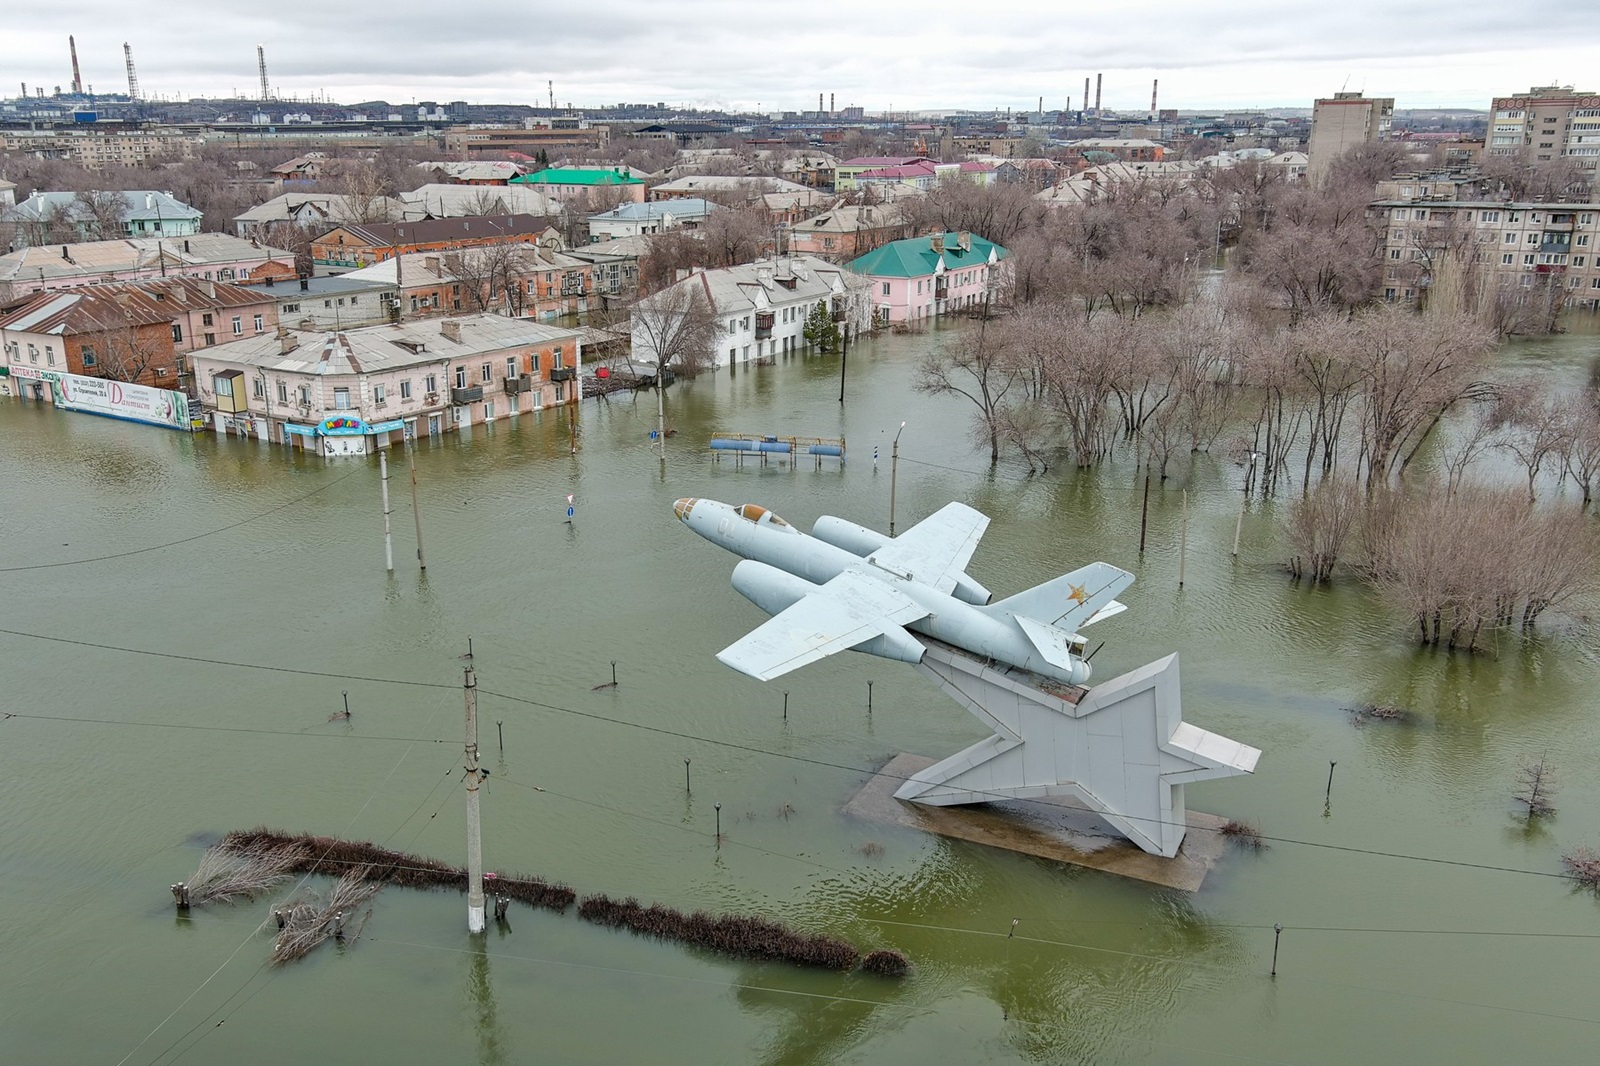 RUSSIA, ORENBURG REGION - APRIL 8, 2024: A view of flood-hit Gagarin Square in the town of Orsk. On the night between 5 and 6 April, a floodbank broke causing the River Ural to flood certain areas in the town. On the evening of the same day another floodbank breach occurred. A federal level state of emergency has been declared in the Orenburg Region. Yegor Aleyev/TASS,Image: 863277285, License: Rights-managed, Restrictions: , Model Release: no, Credit line: Yegor Aleyev / TASS / Profimedia